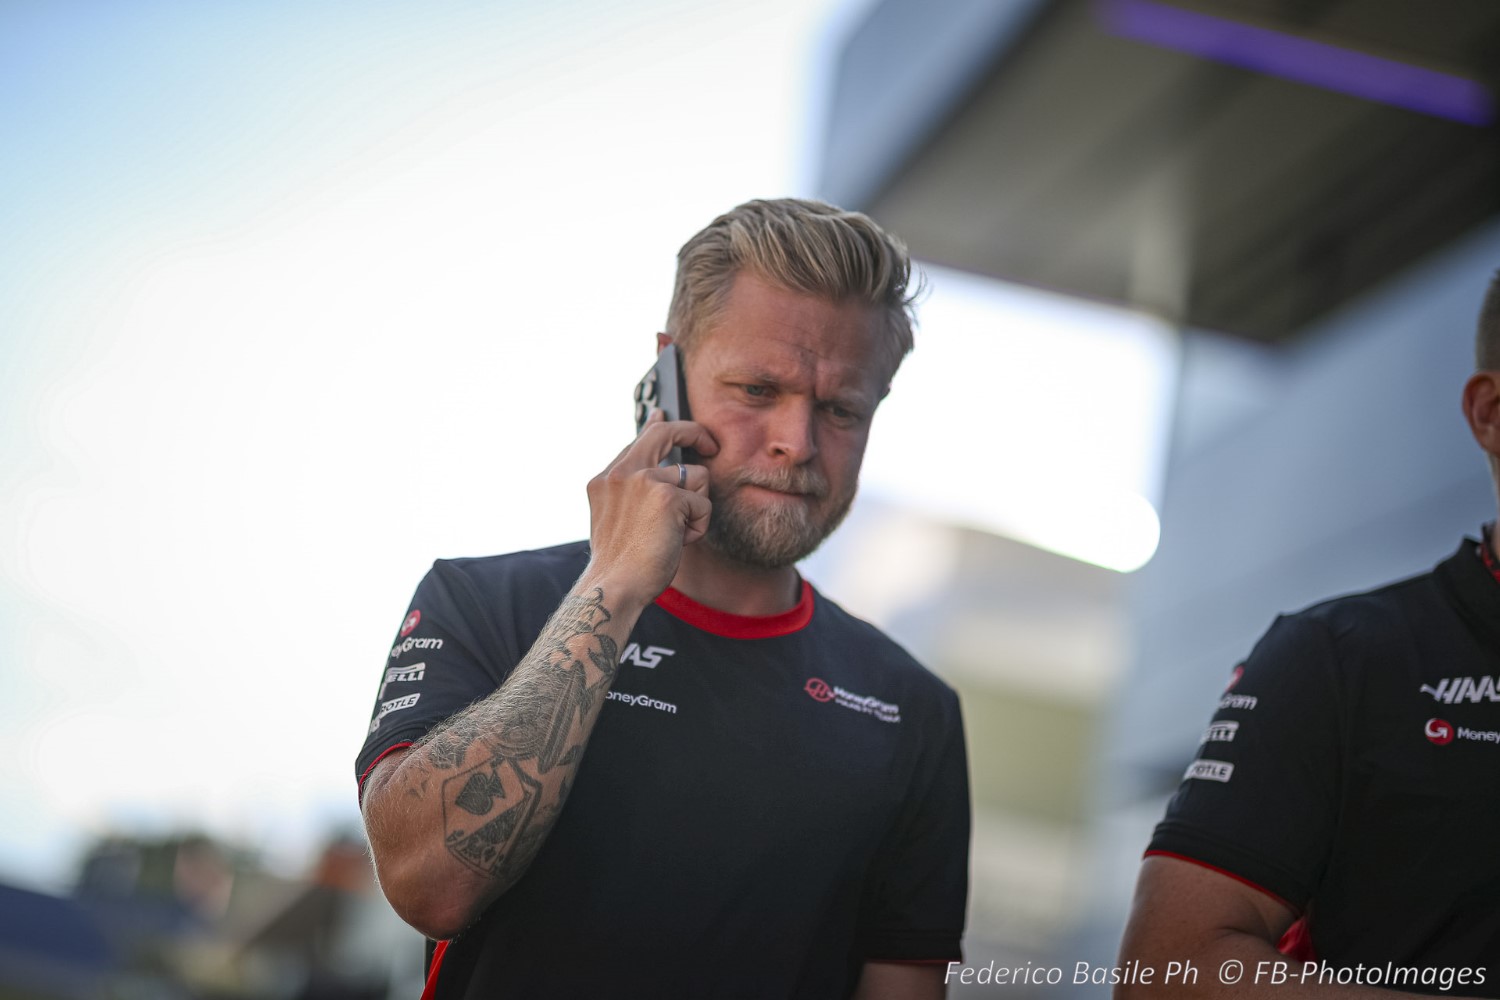 #20 Kevin Magnussen, (DAN) Haas F1 Team during the Austrian GP, Spielberg 29 June-2 July 2023 at the Red Bull Ring, Formula 1 World championship 2023.